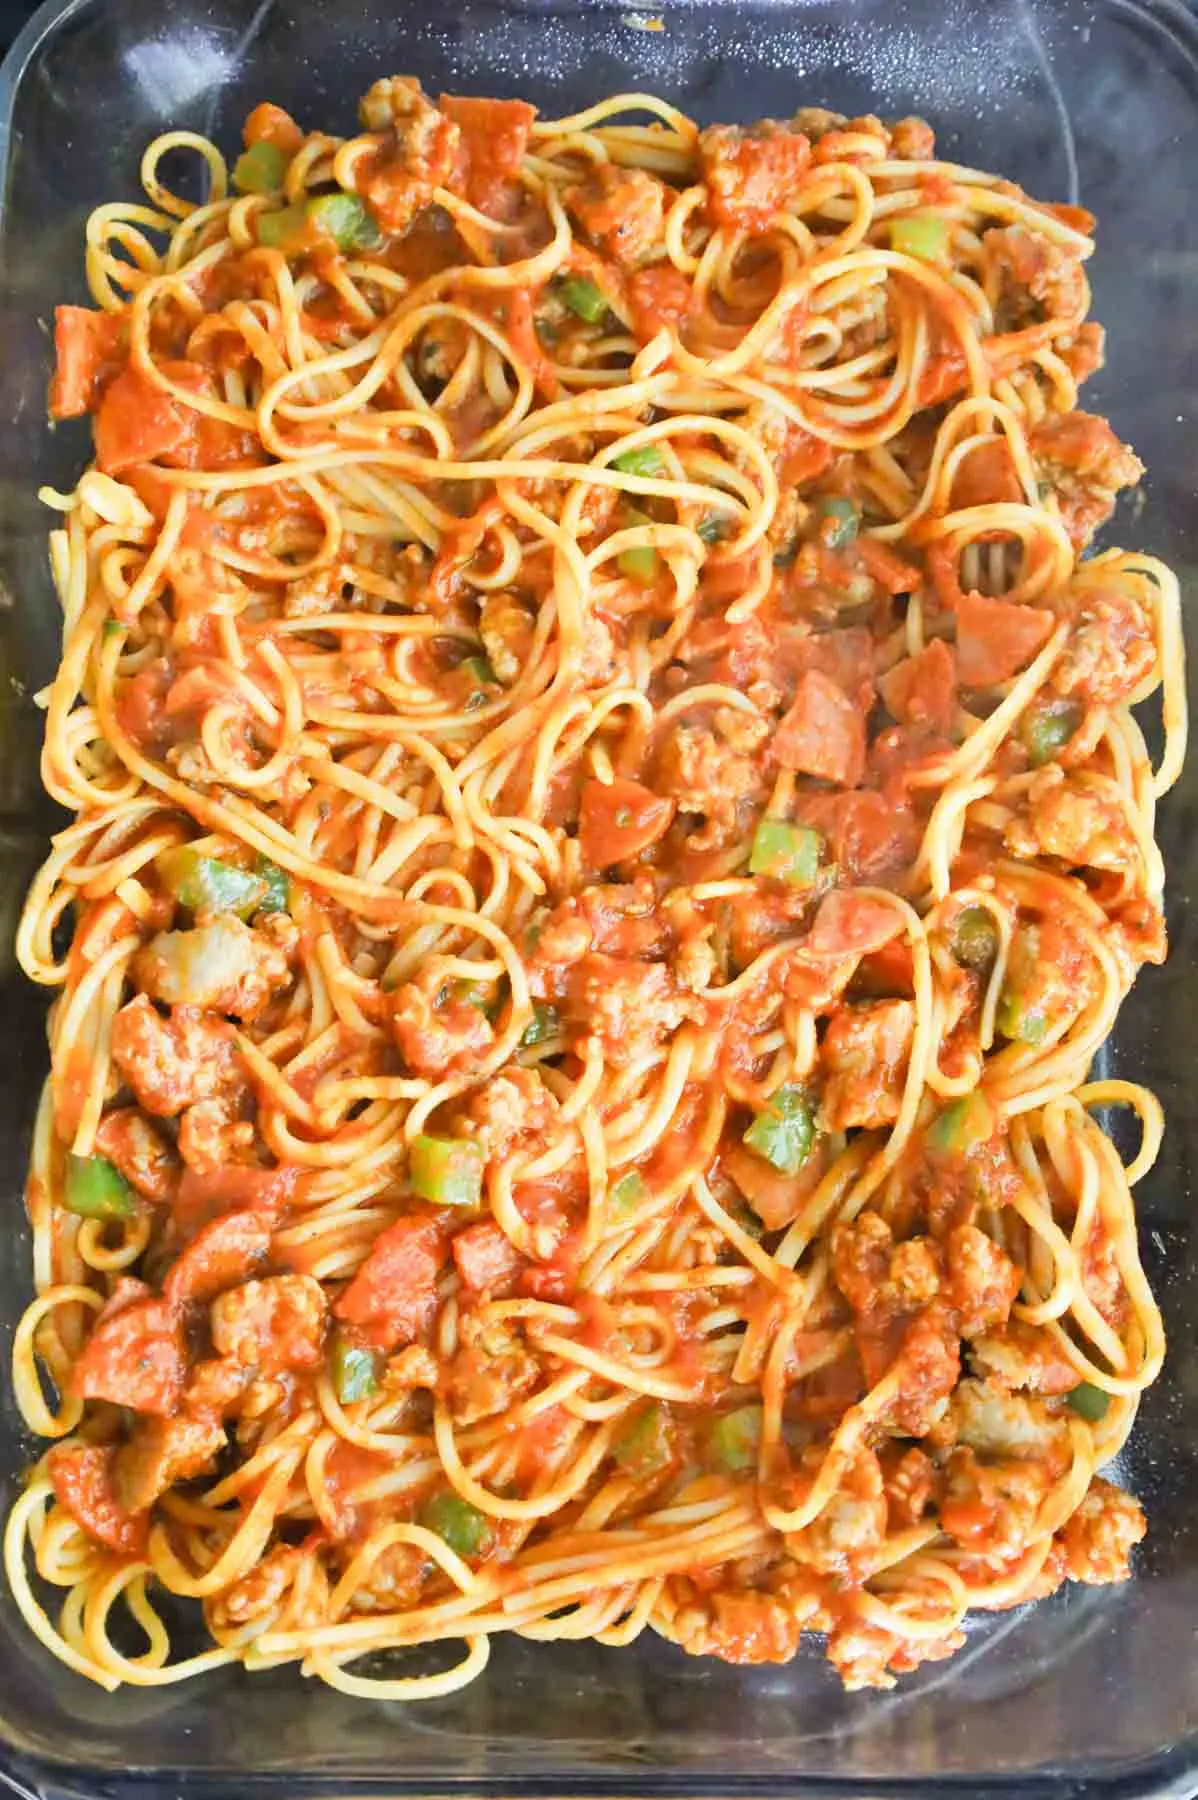 spaghetti with pepperoni and diced peppers in a baking dish